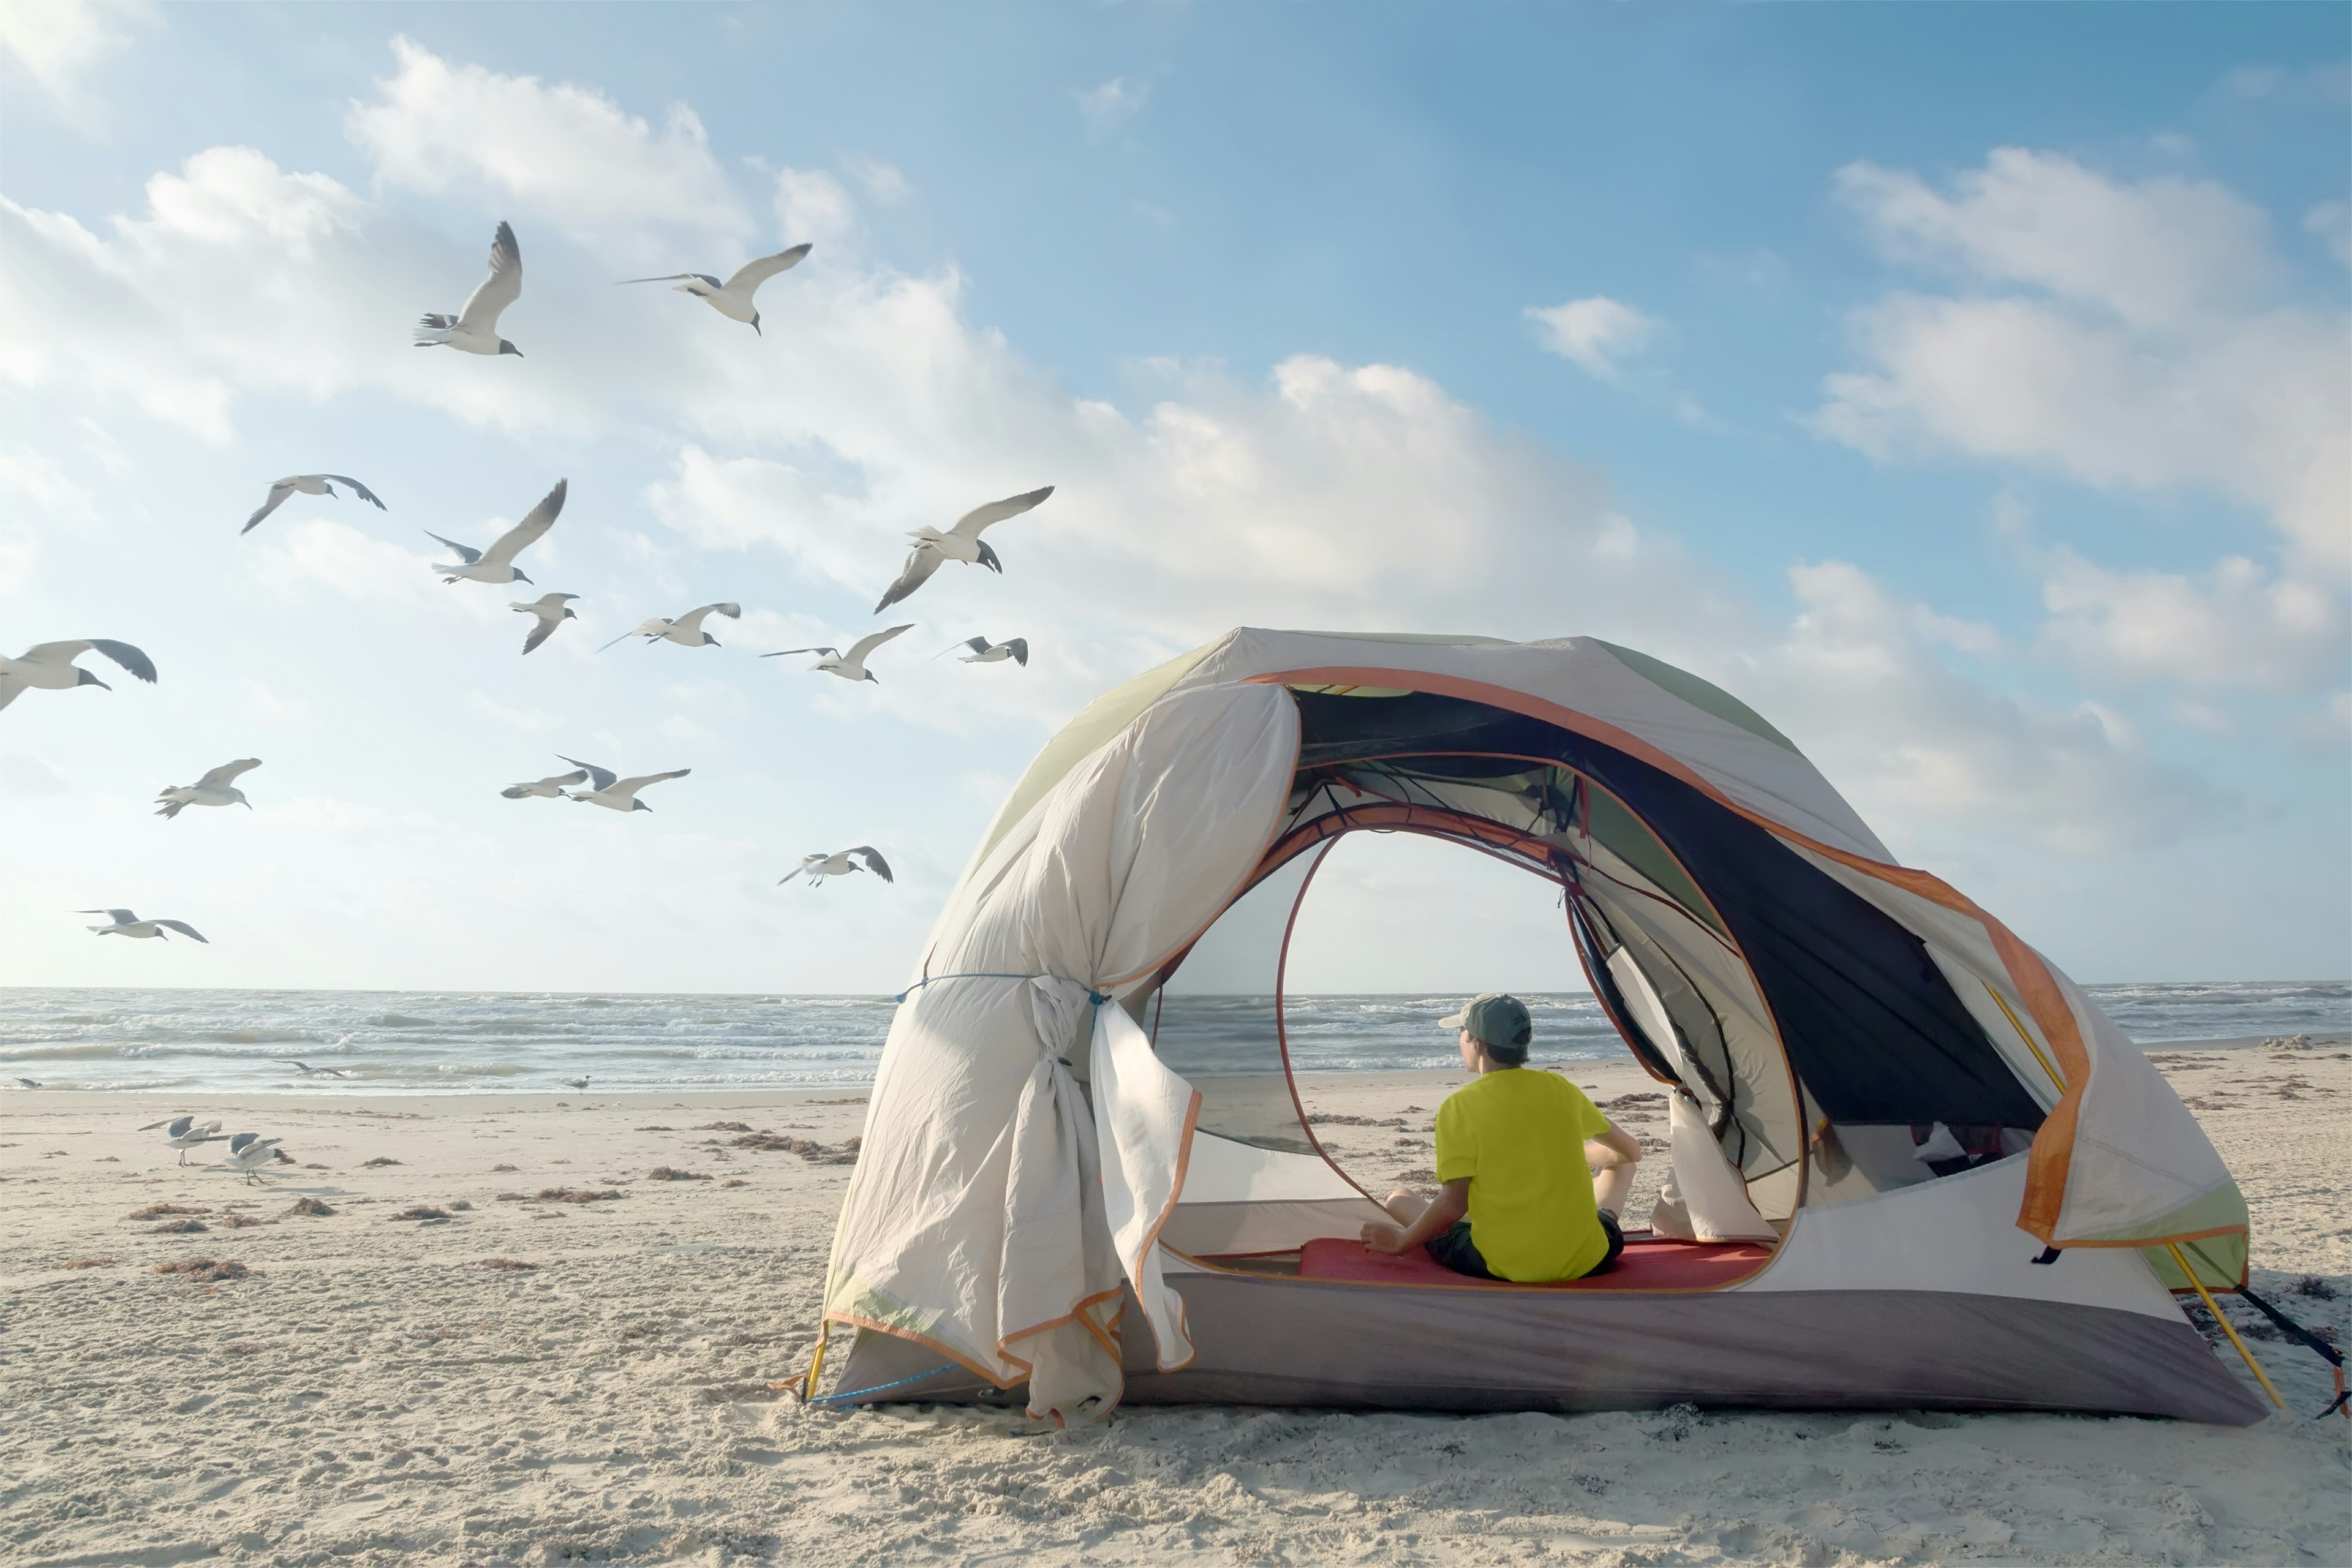 Camping on the shores of the Gulf at Padre Island National Seashore